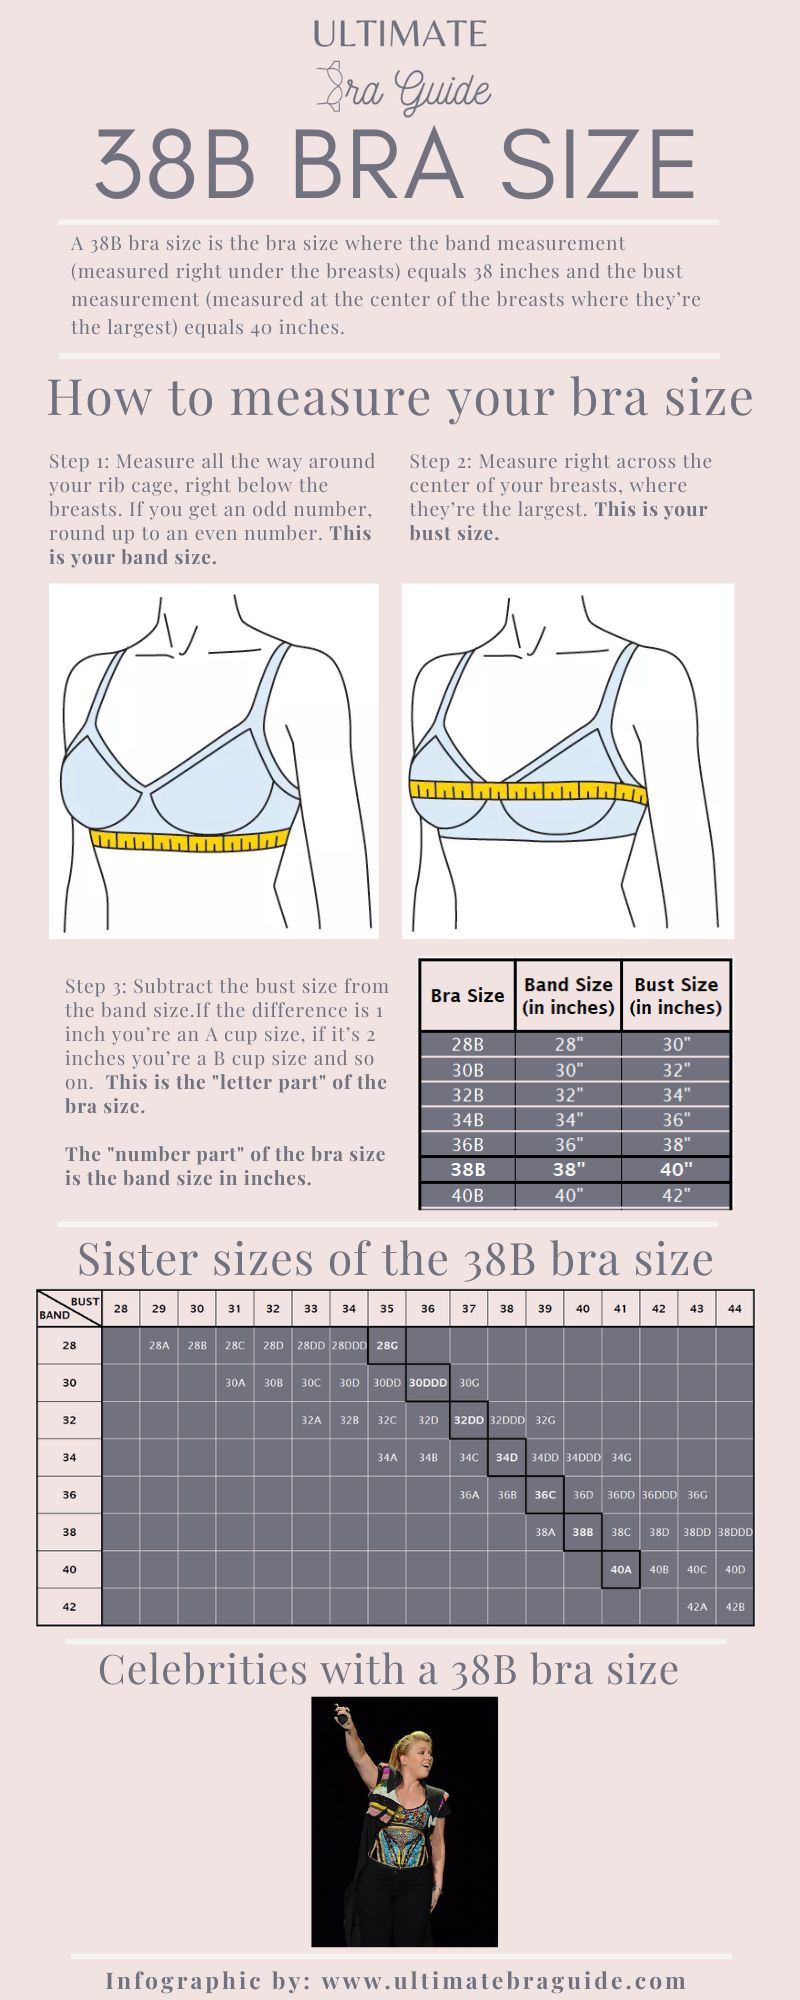 An infographic all about the 38B bra size - what it is, how to measure if you're 38B bra size, 38B bra sister sizes, 38B cup examples, and so on